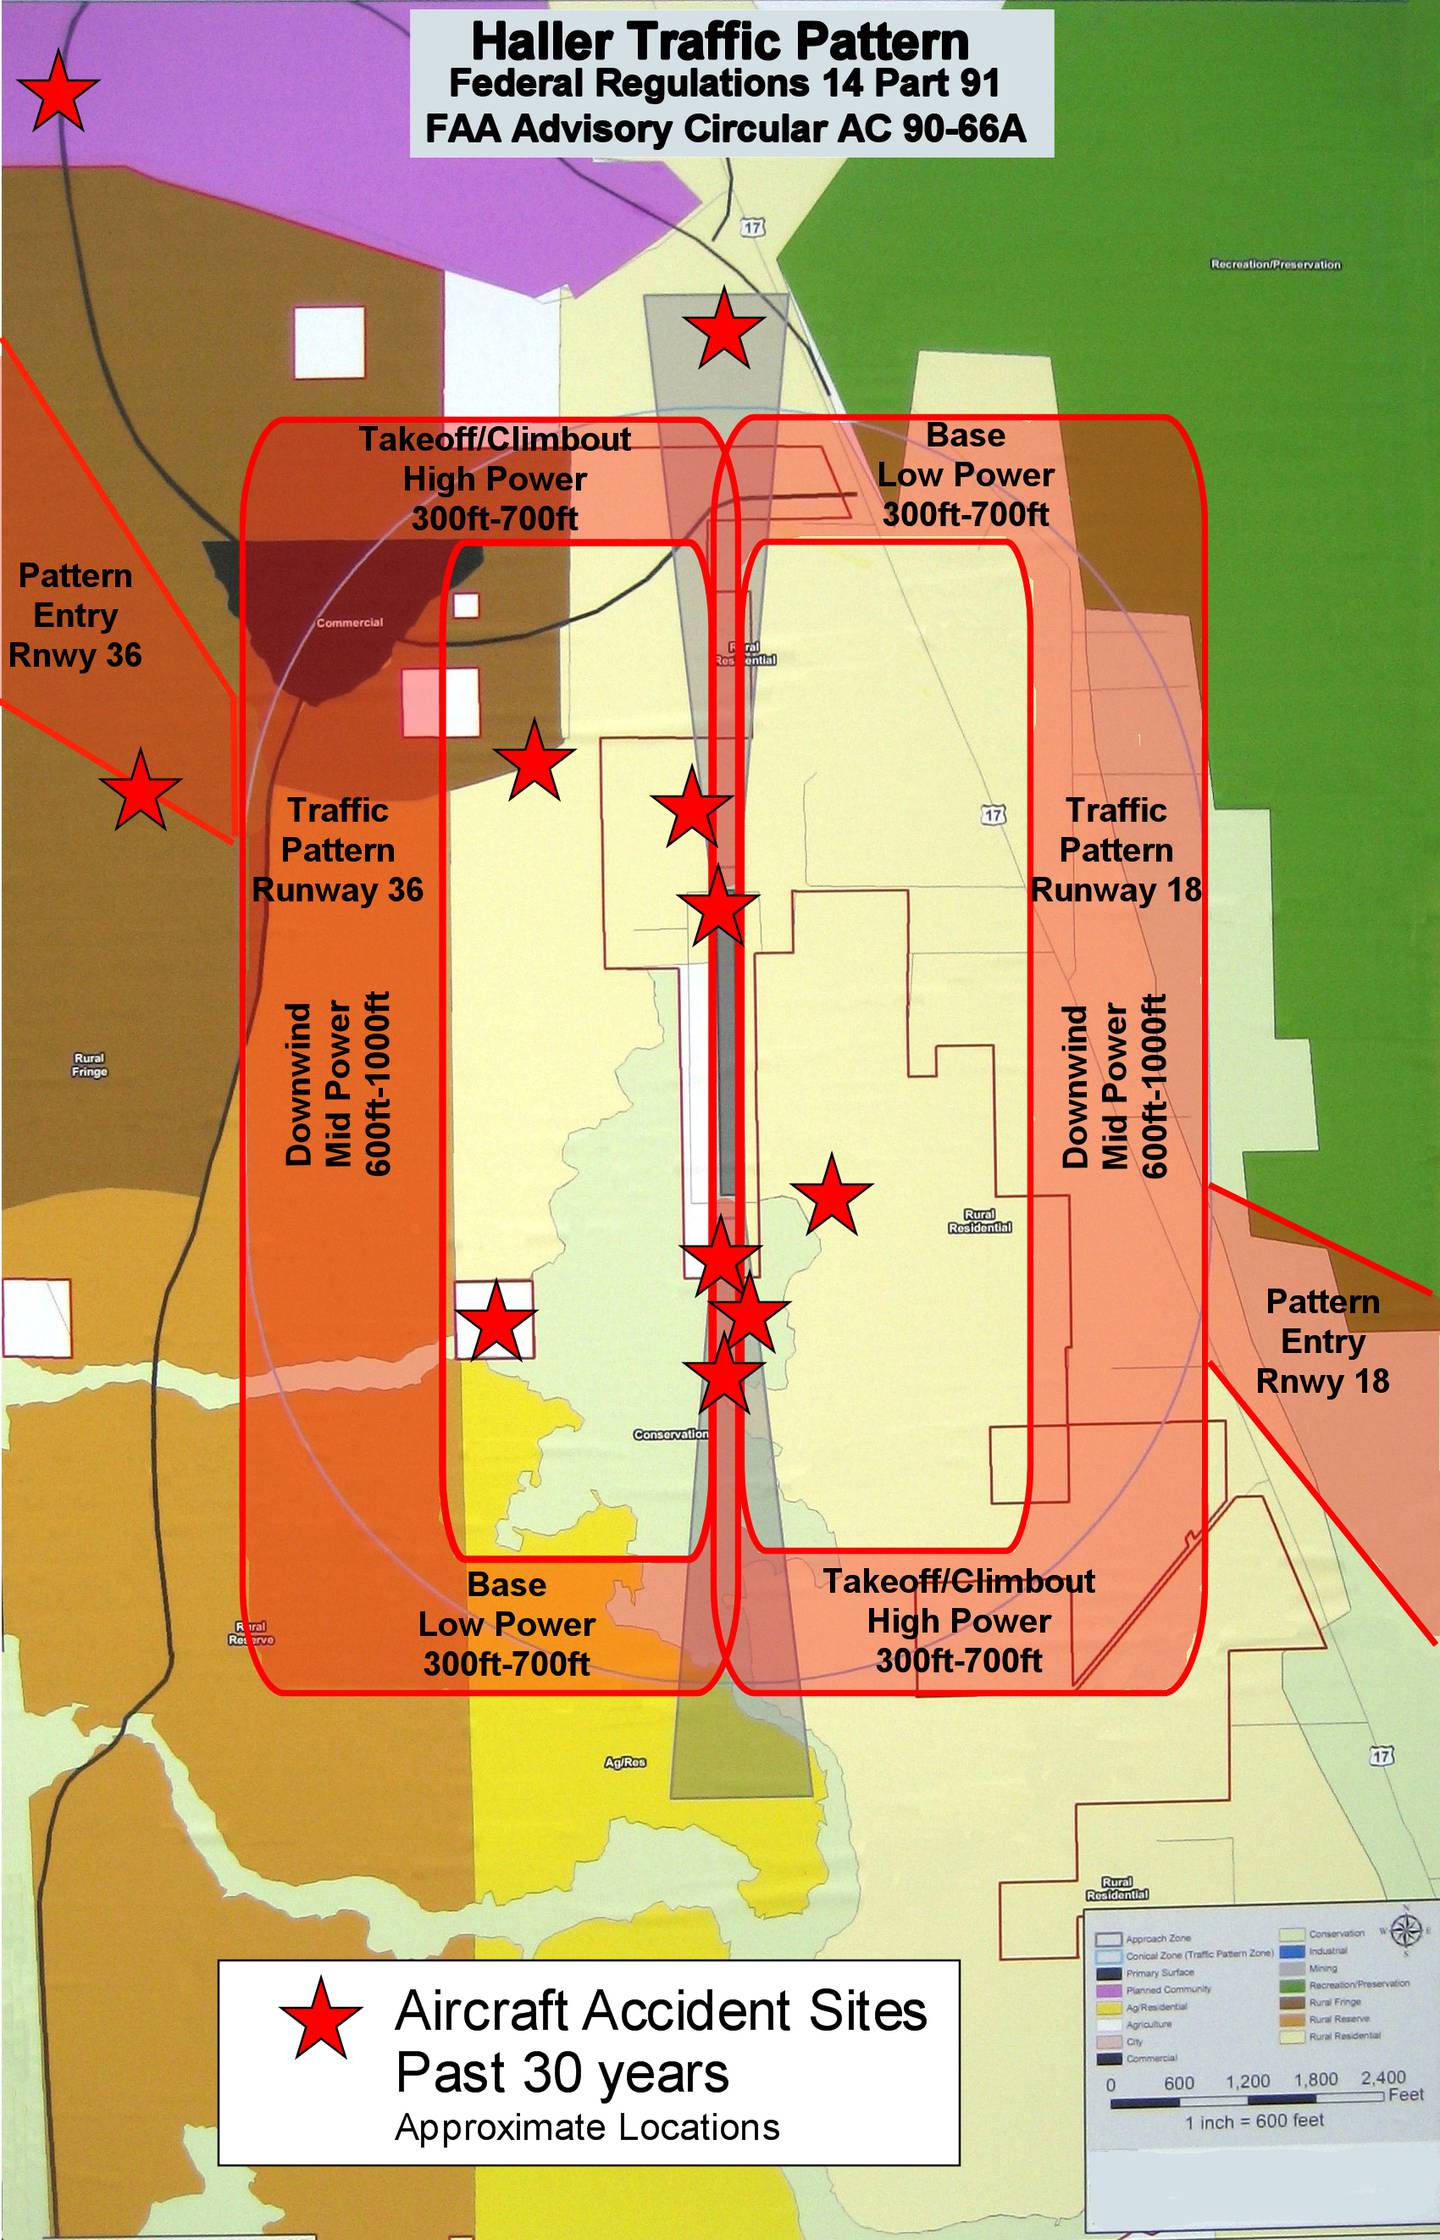 Haller Airport accident sites over the past 30 years